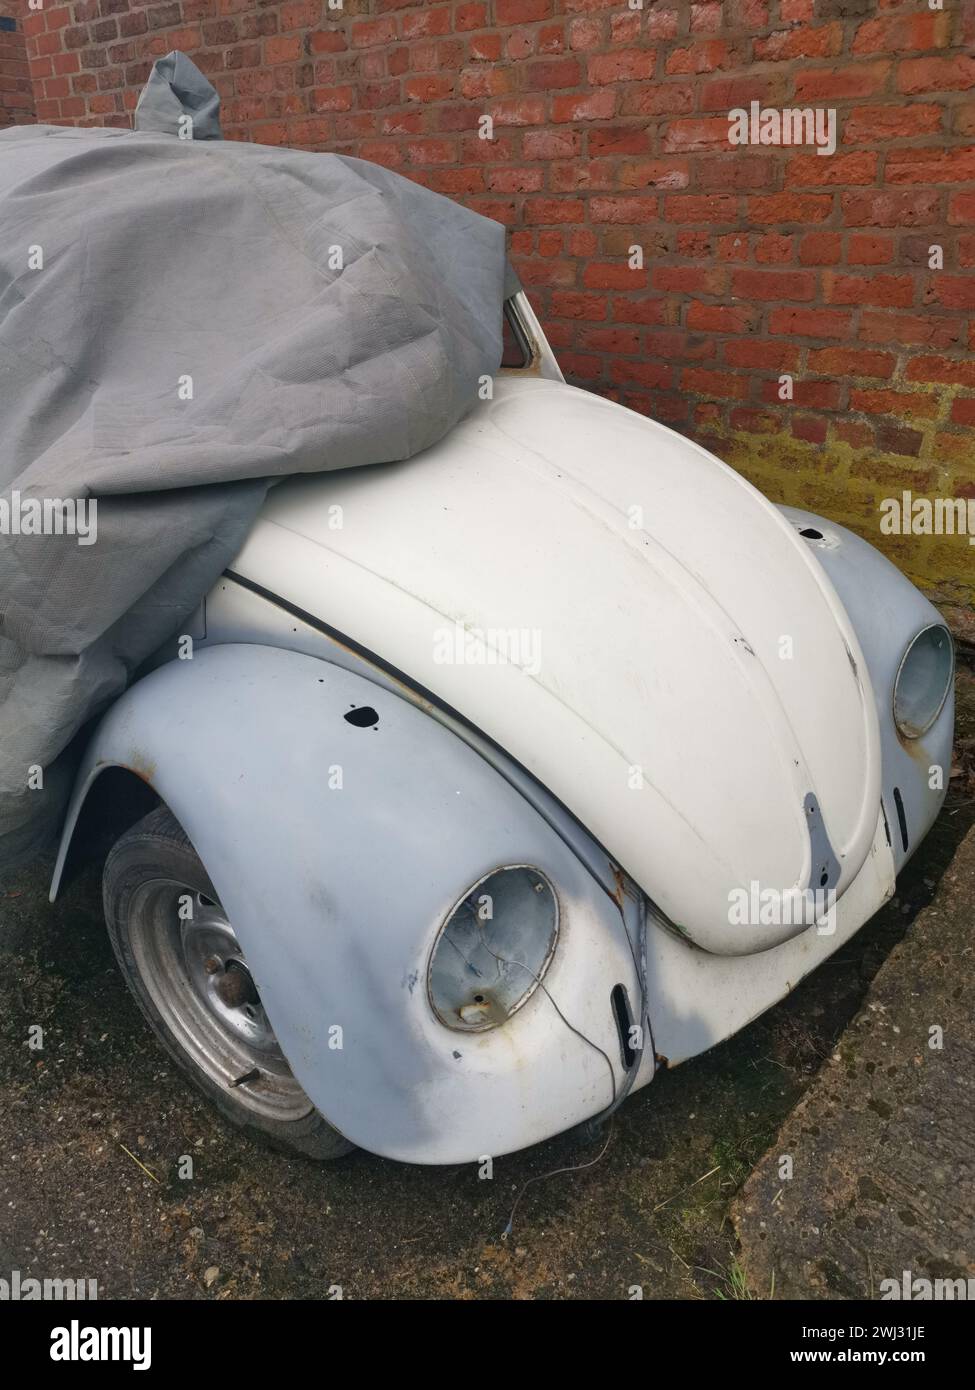 A vintage Volkswagen Beetle in the process of restoration. Stock Photo